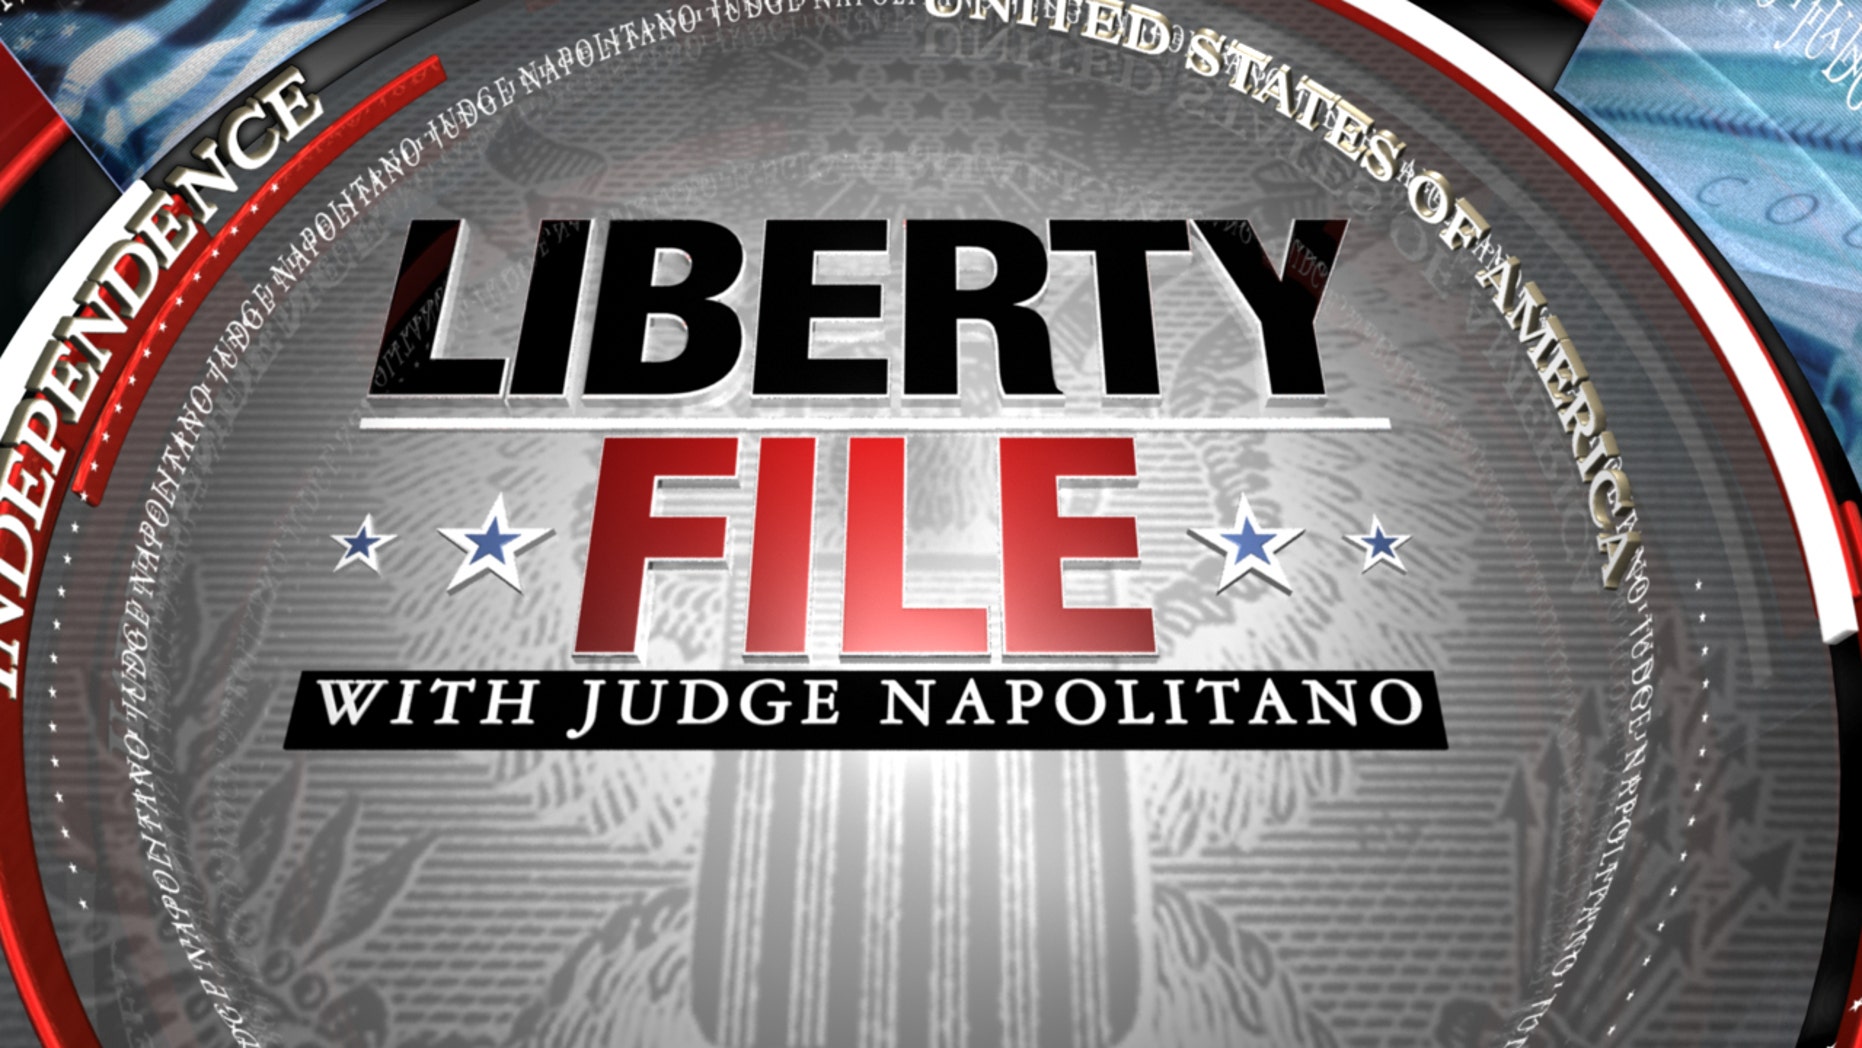 Judge Andrew Napolitano: How dumb are the politicians who want to remove your right to self-defense?